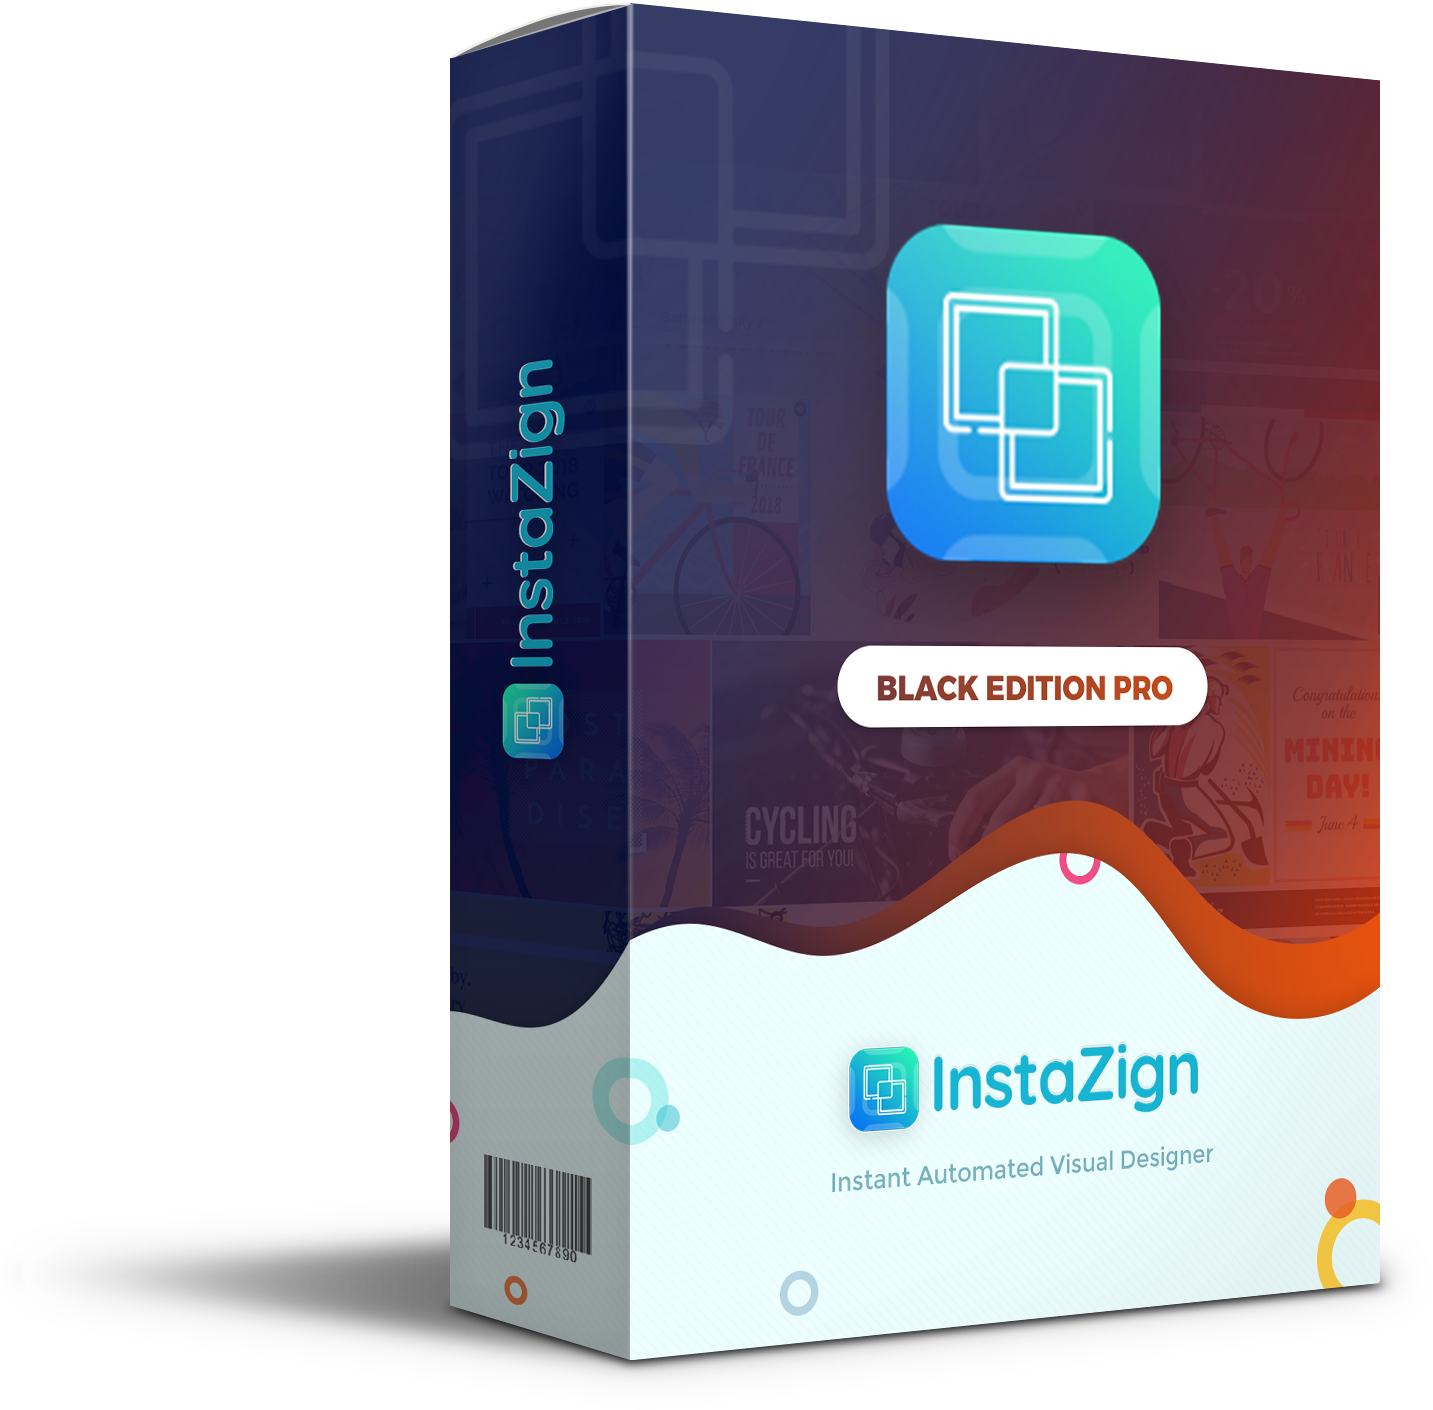 Instazign Review: *Read Here Before Buying this Product* 10